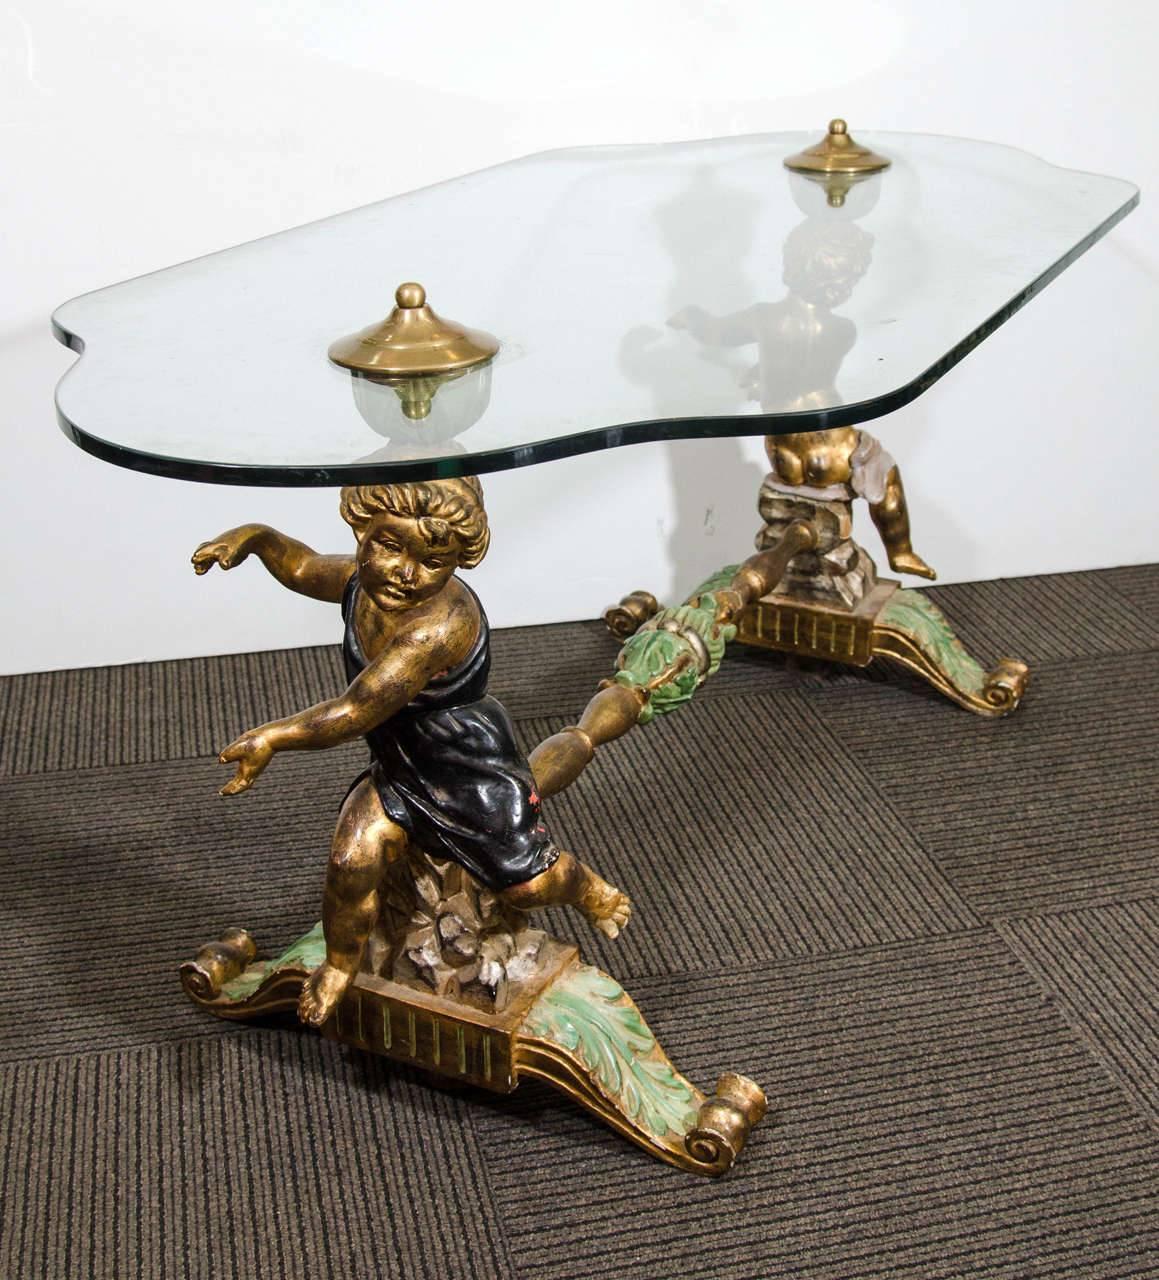 An incredible Italian carved wood and hand-painted coffee or cocktail table with putti or cherubs.